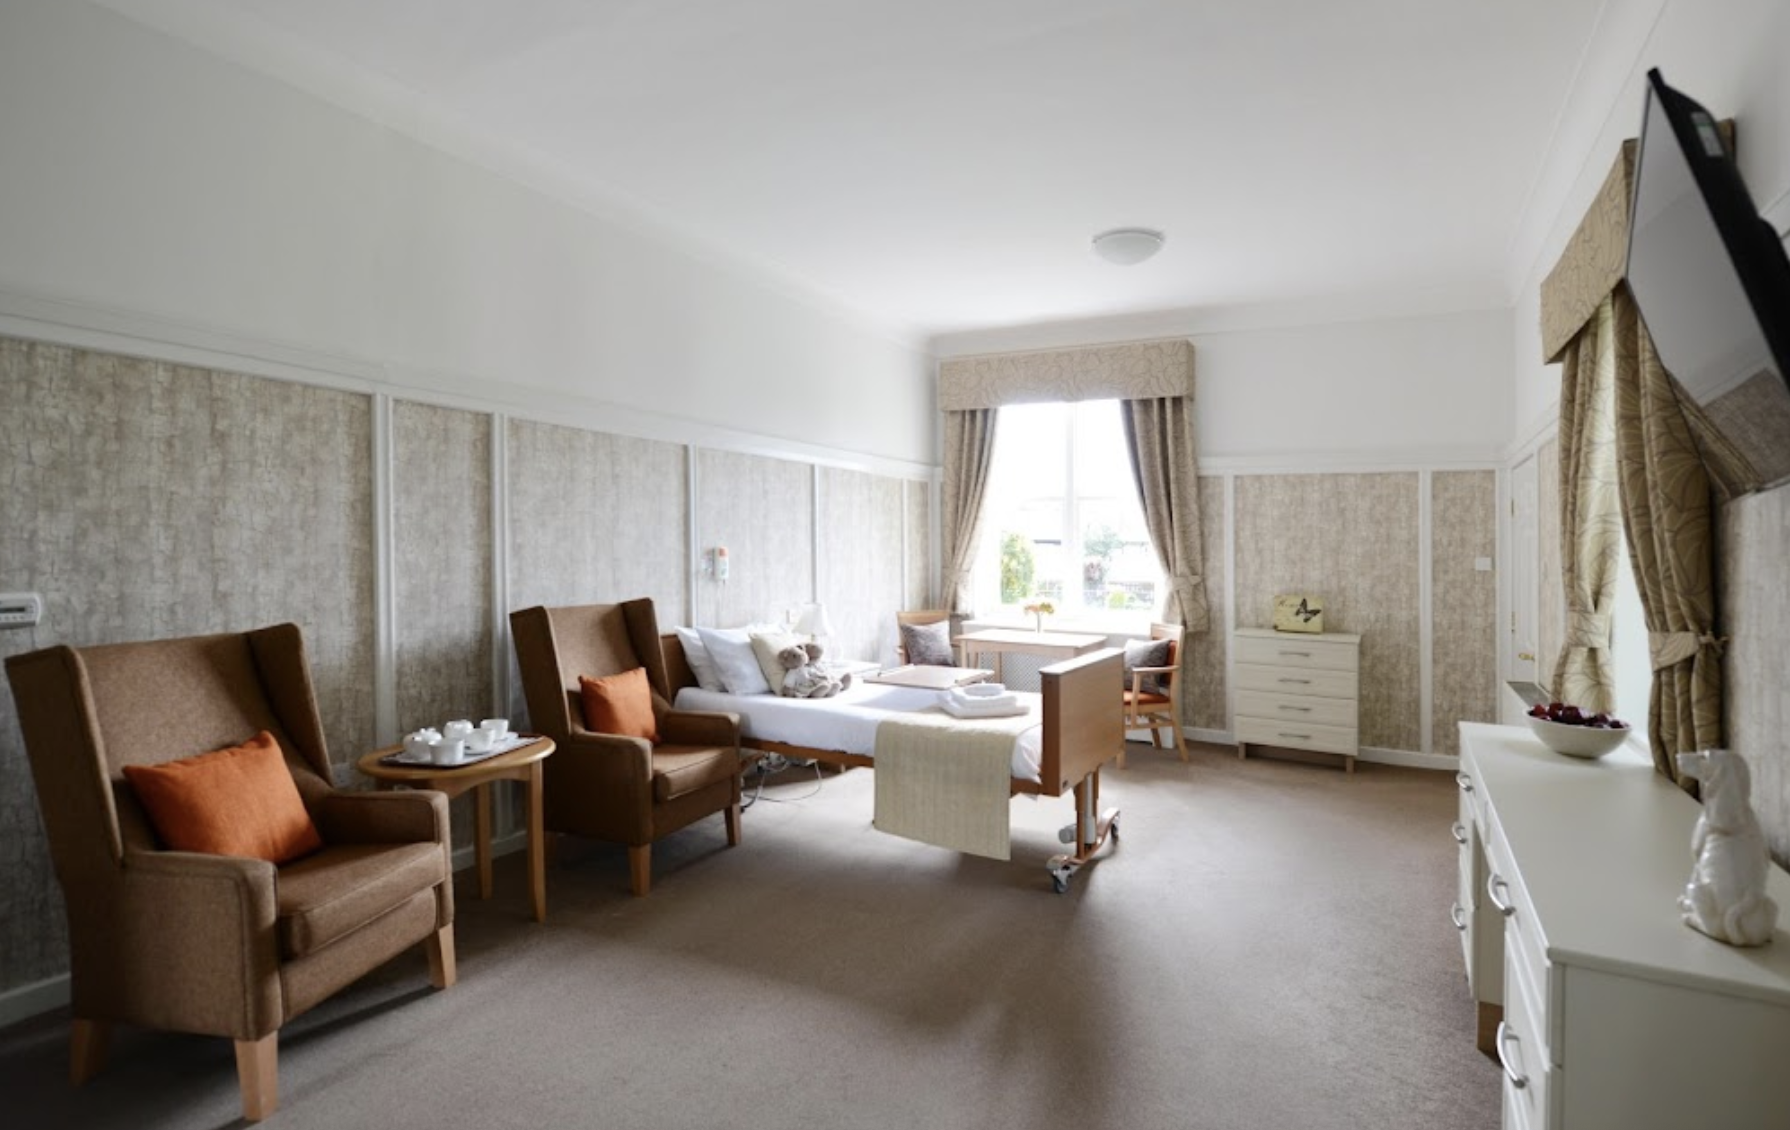 Bupa - Southlands care home 5